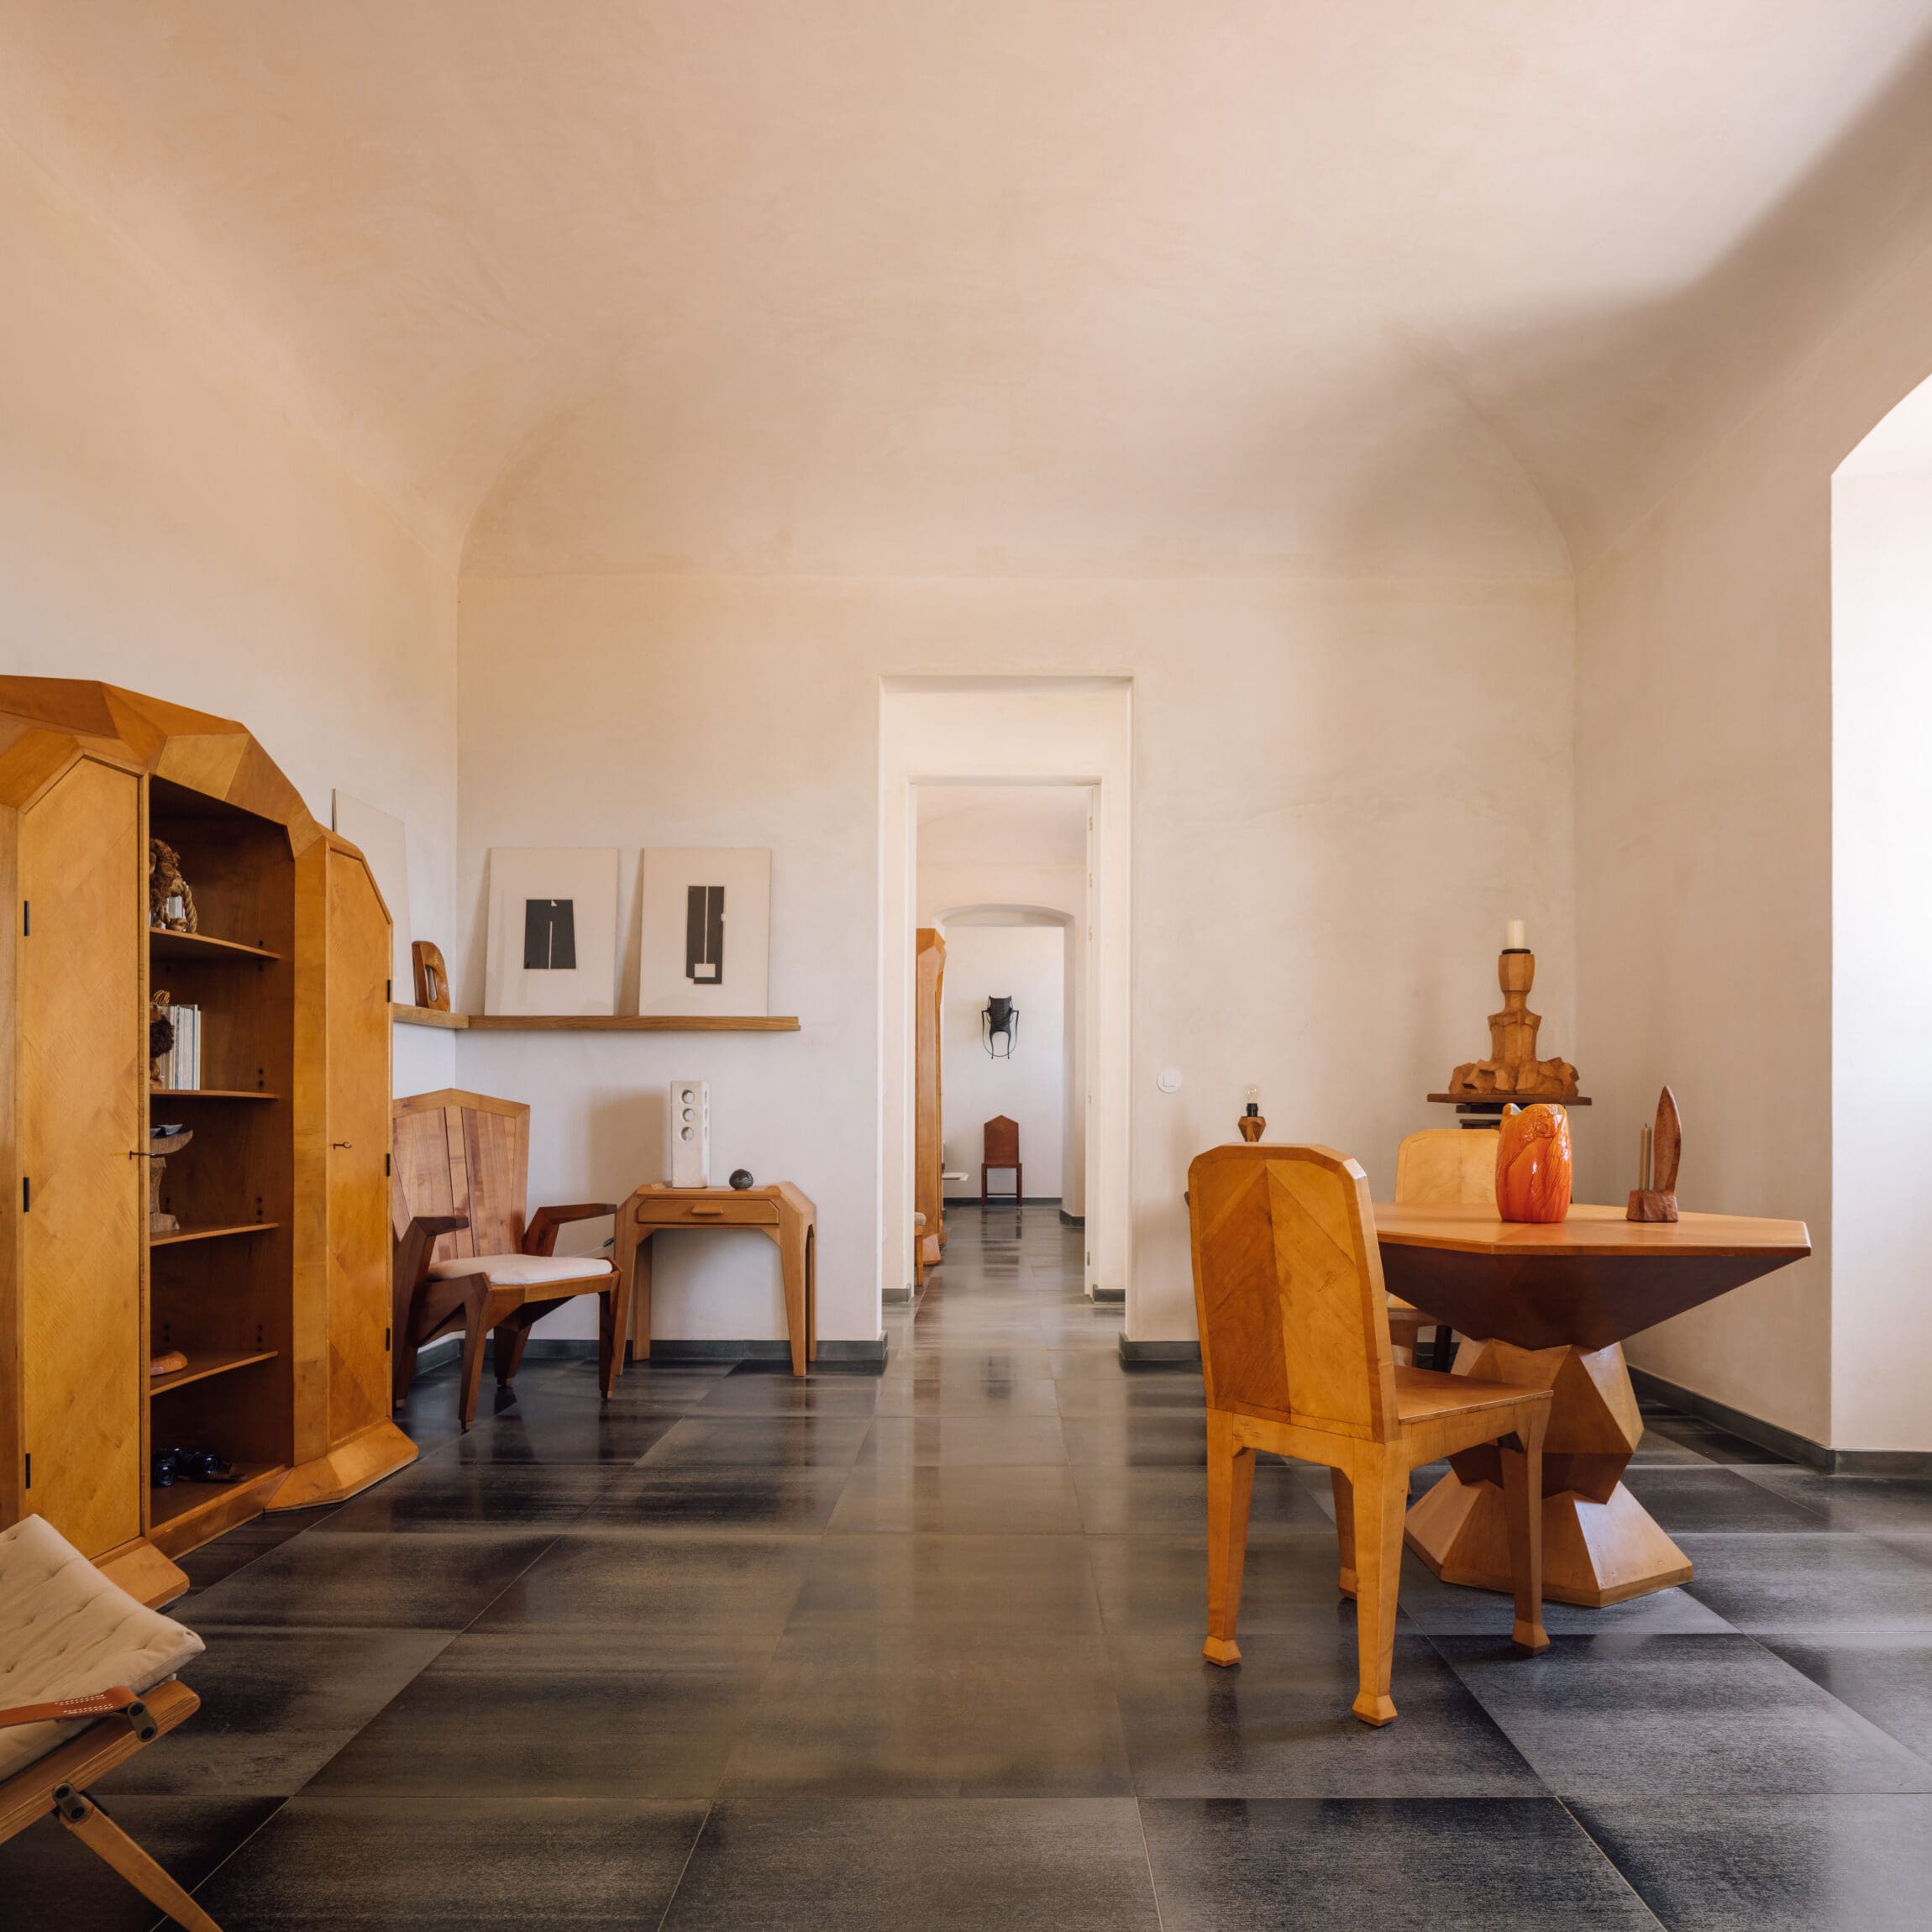 The interiors of Dá Licença in Portugal, with anthroposophical design furnishing the whitewashed space